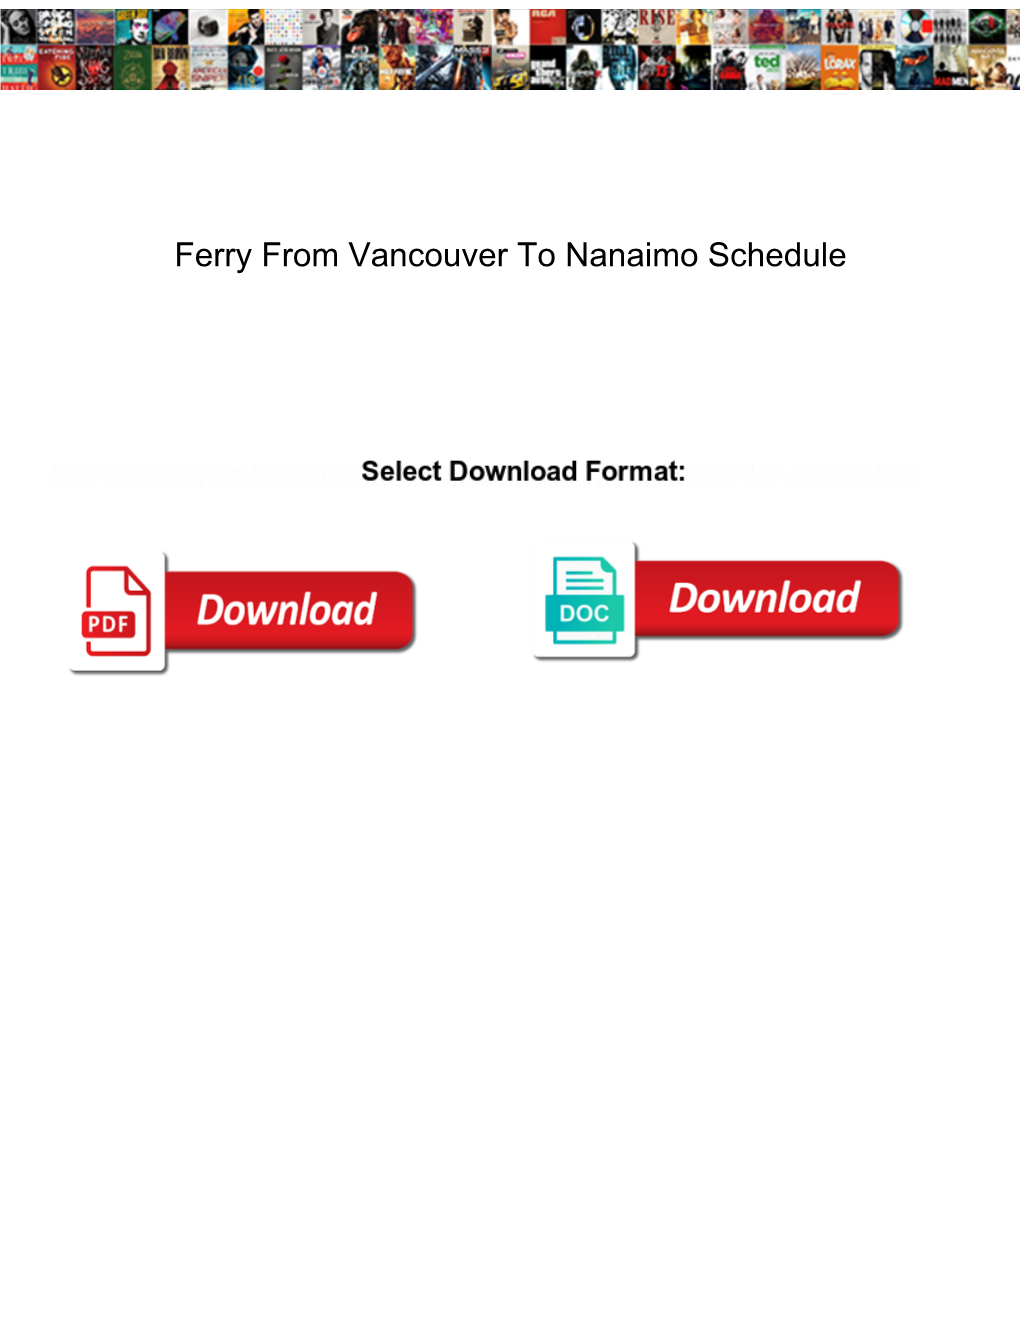 Ferry from Vancouver to Nanaimo Schedule